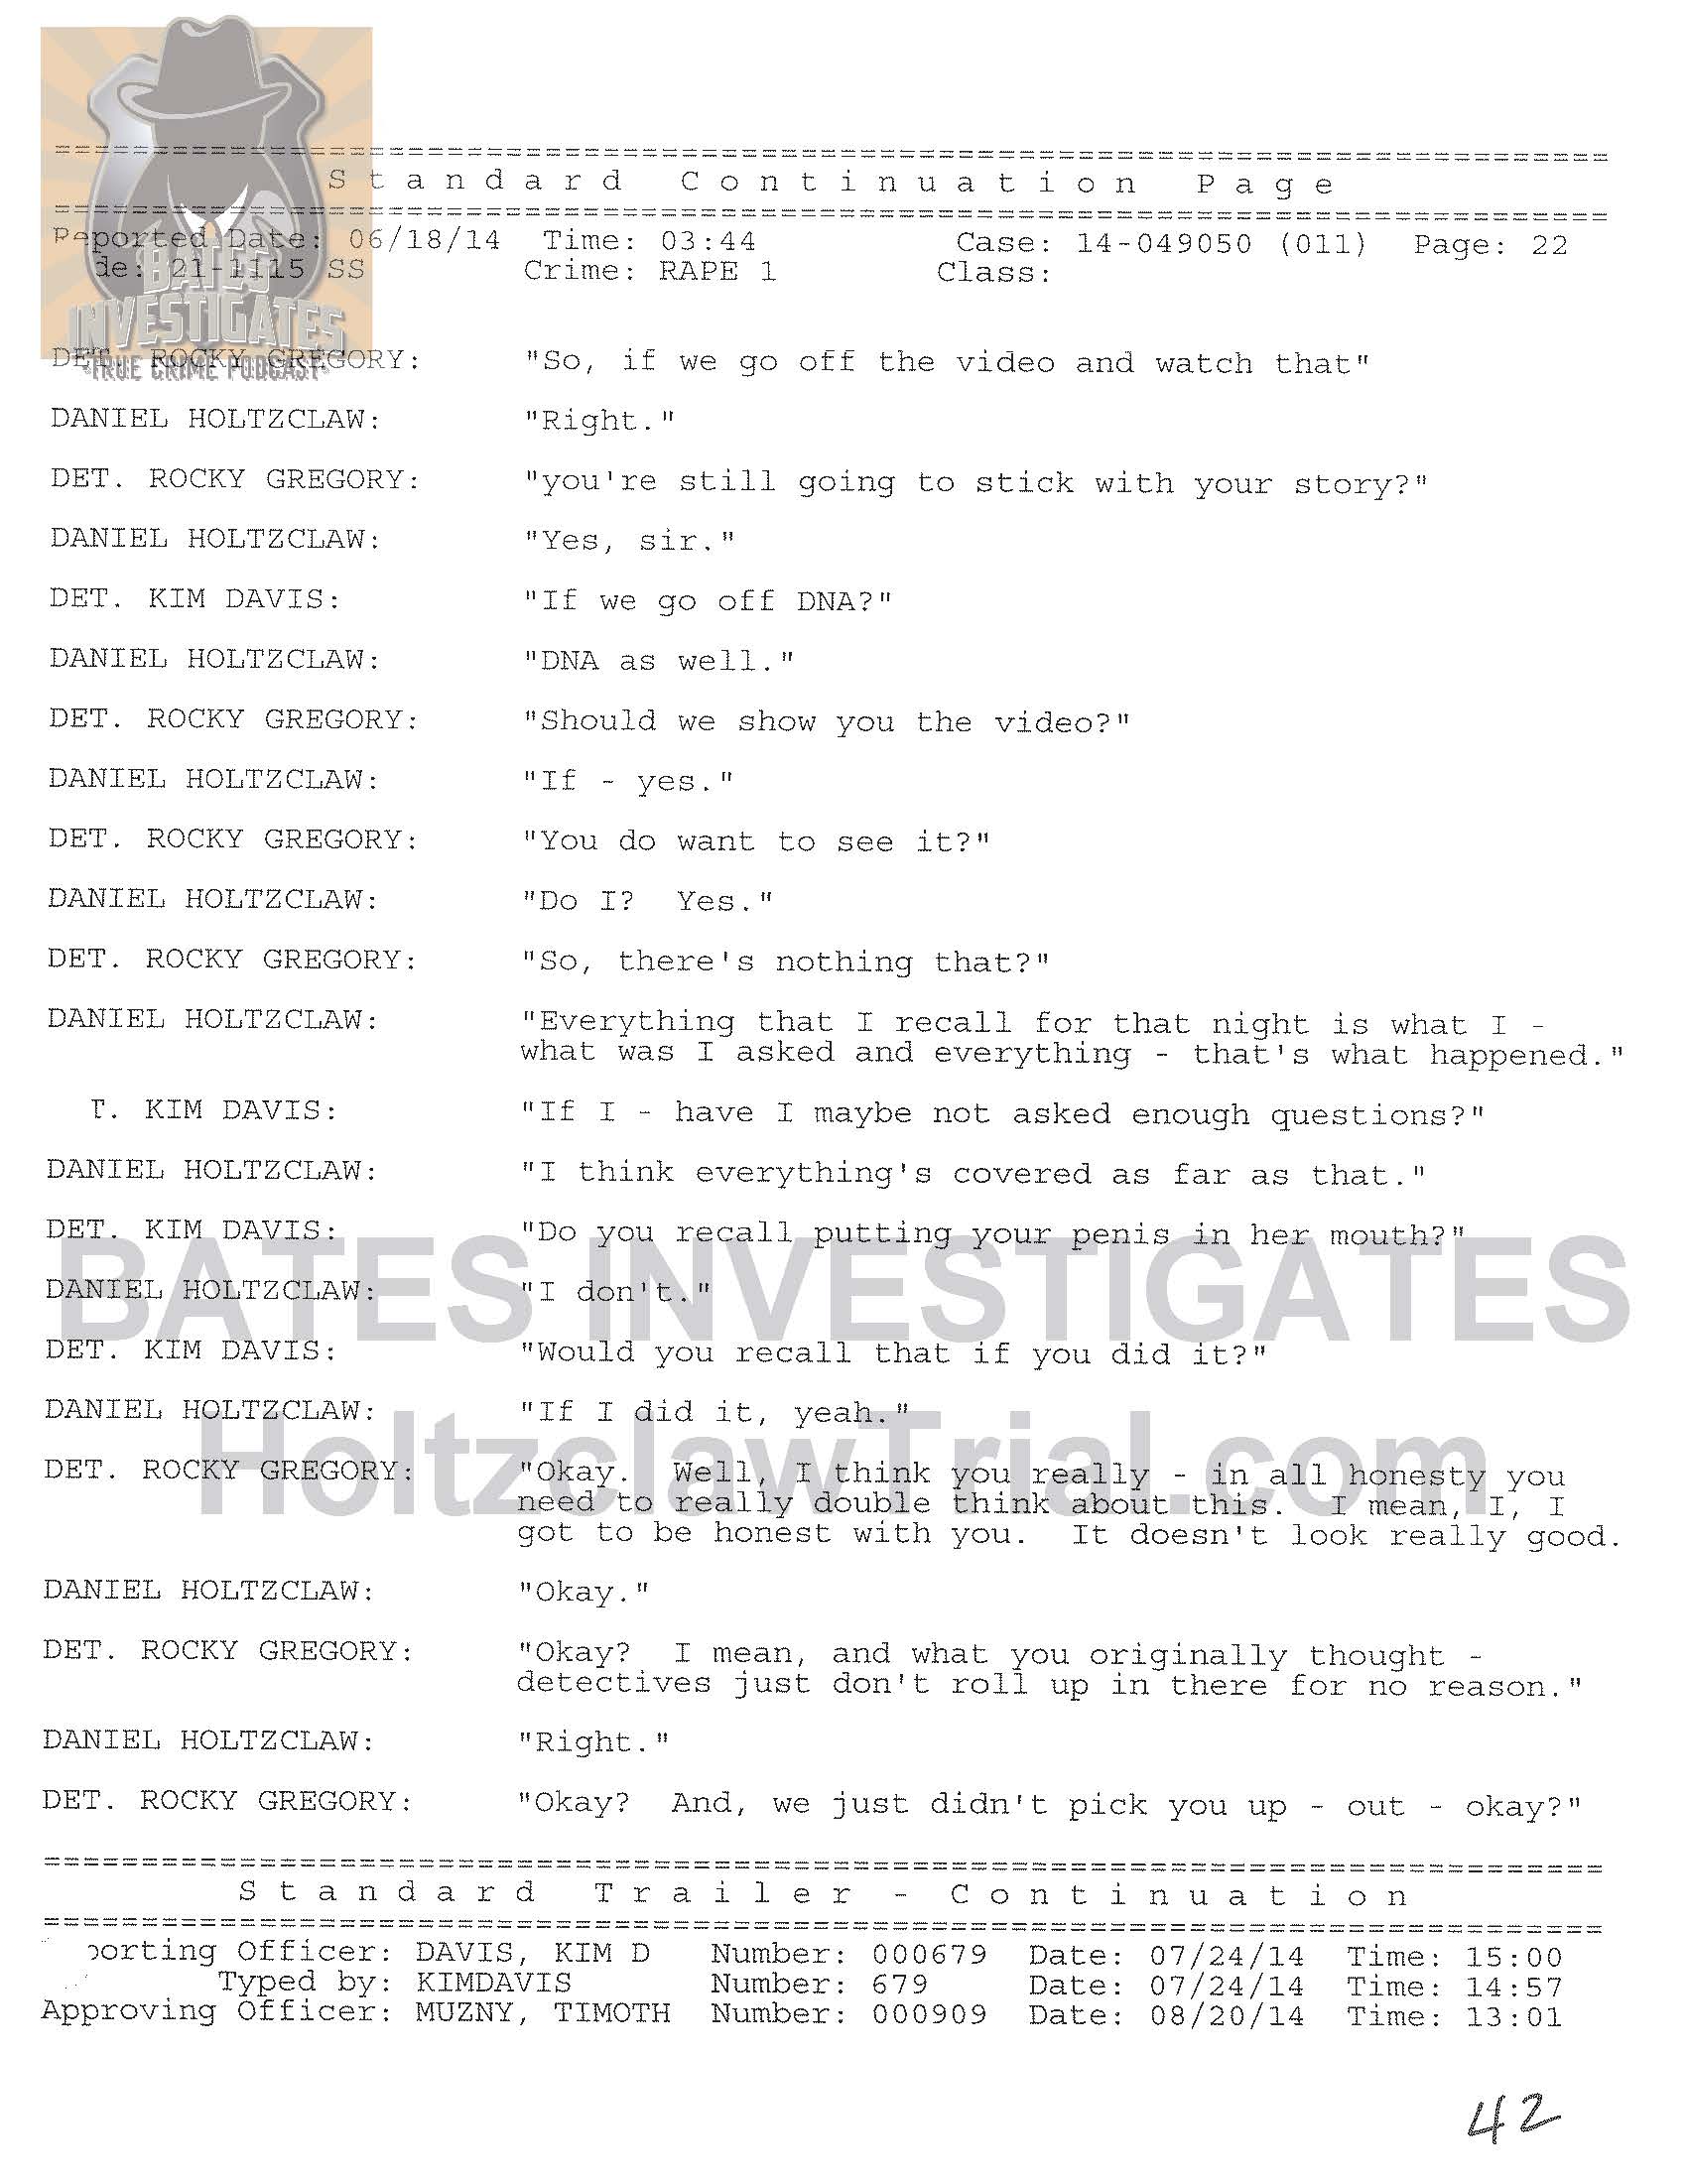 Holtzclaw Interrogation Transcript - Ep02 Redacted_Page_22.jpg